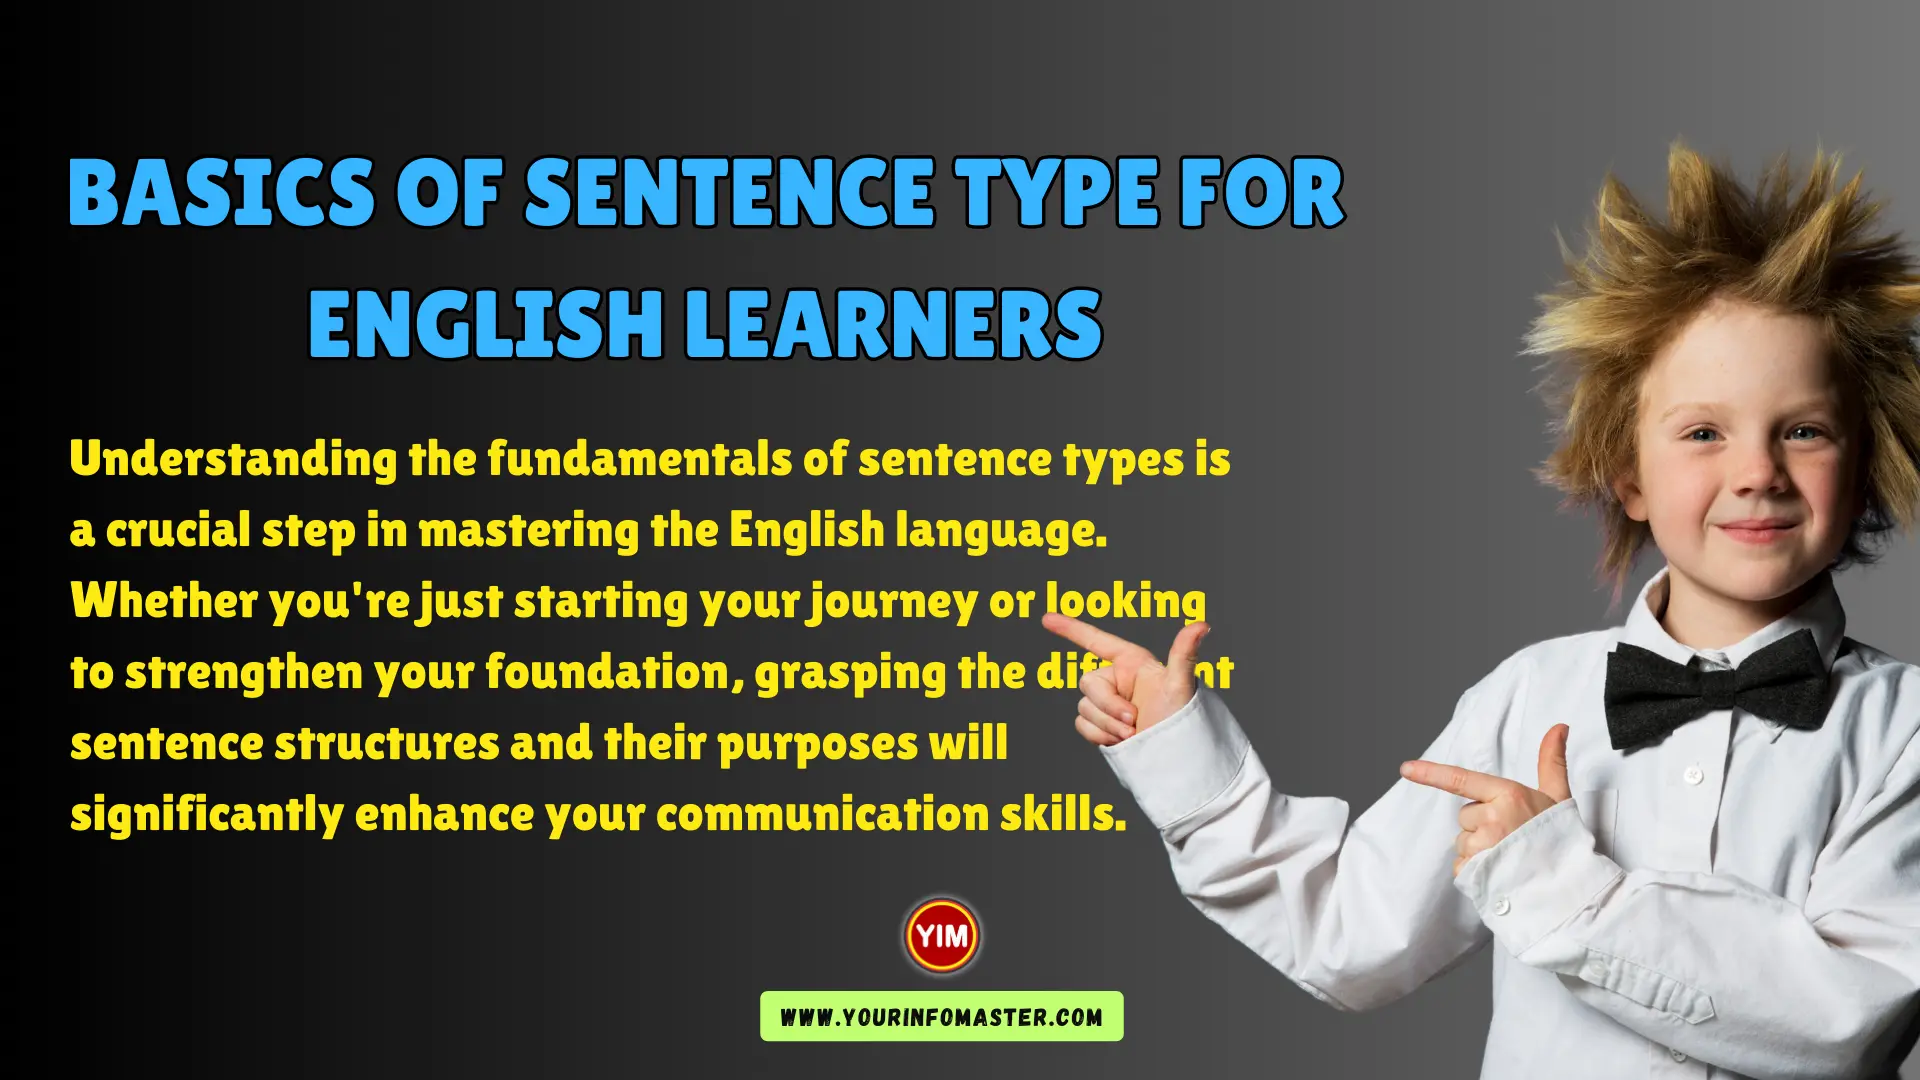 Basics of Sentence Type for English Learners